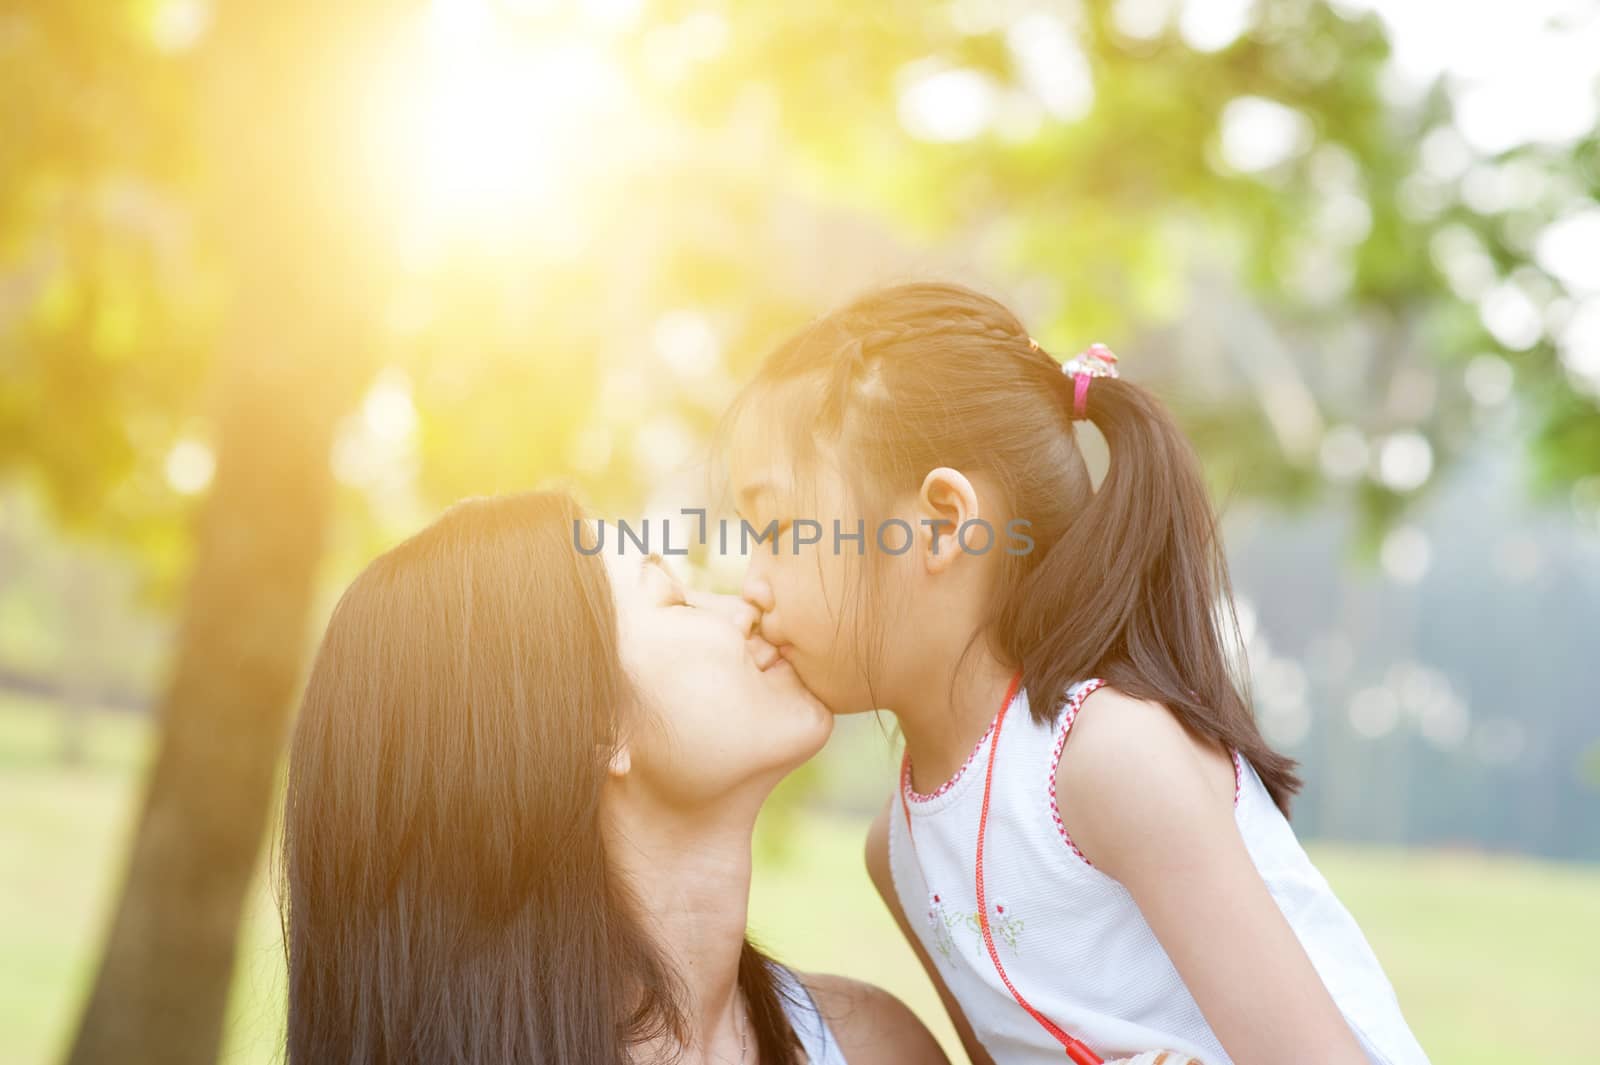 Lifestyle portrait mom and daughter kissing in happiness at the outside in the park. Family outdoor fun, morning with sun flare.